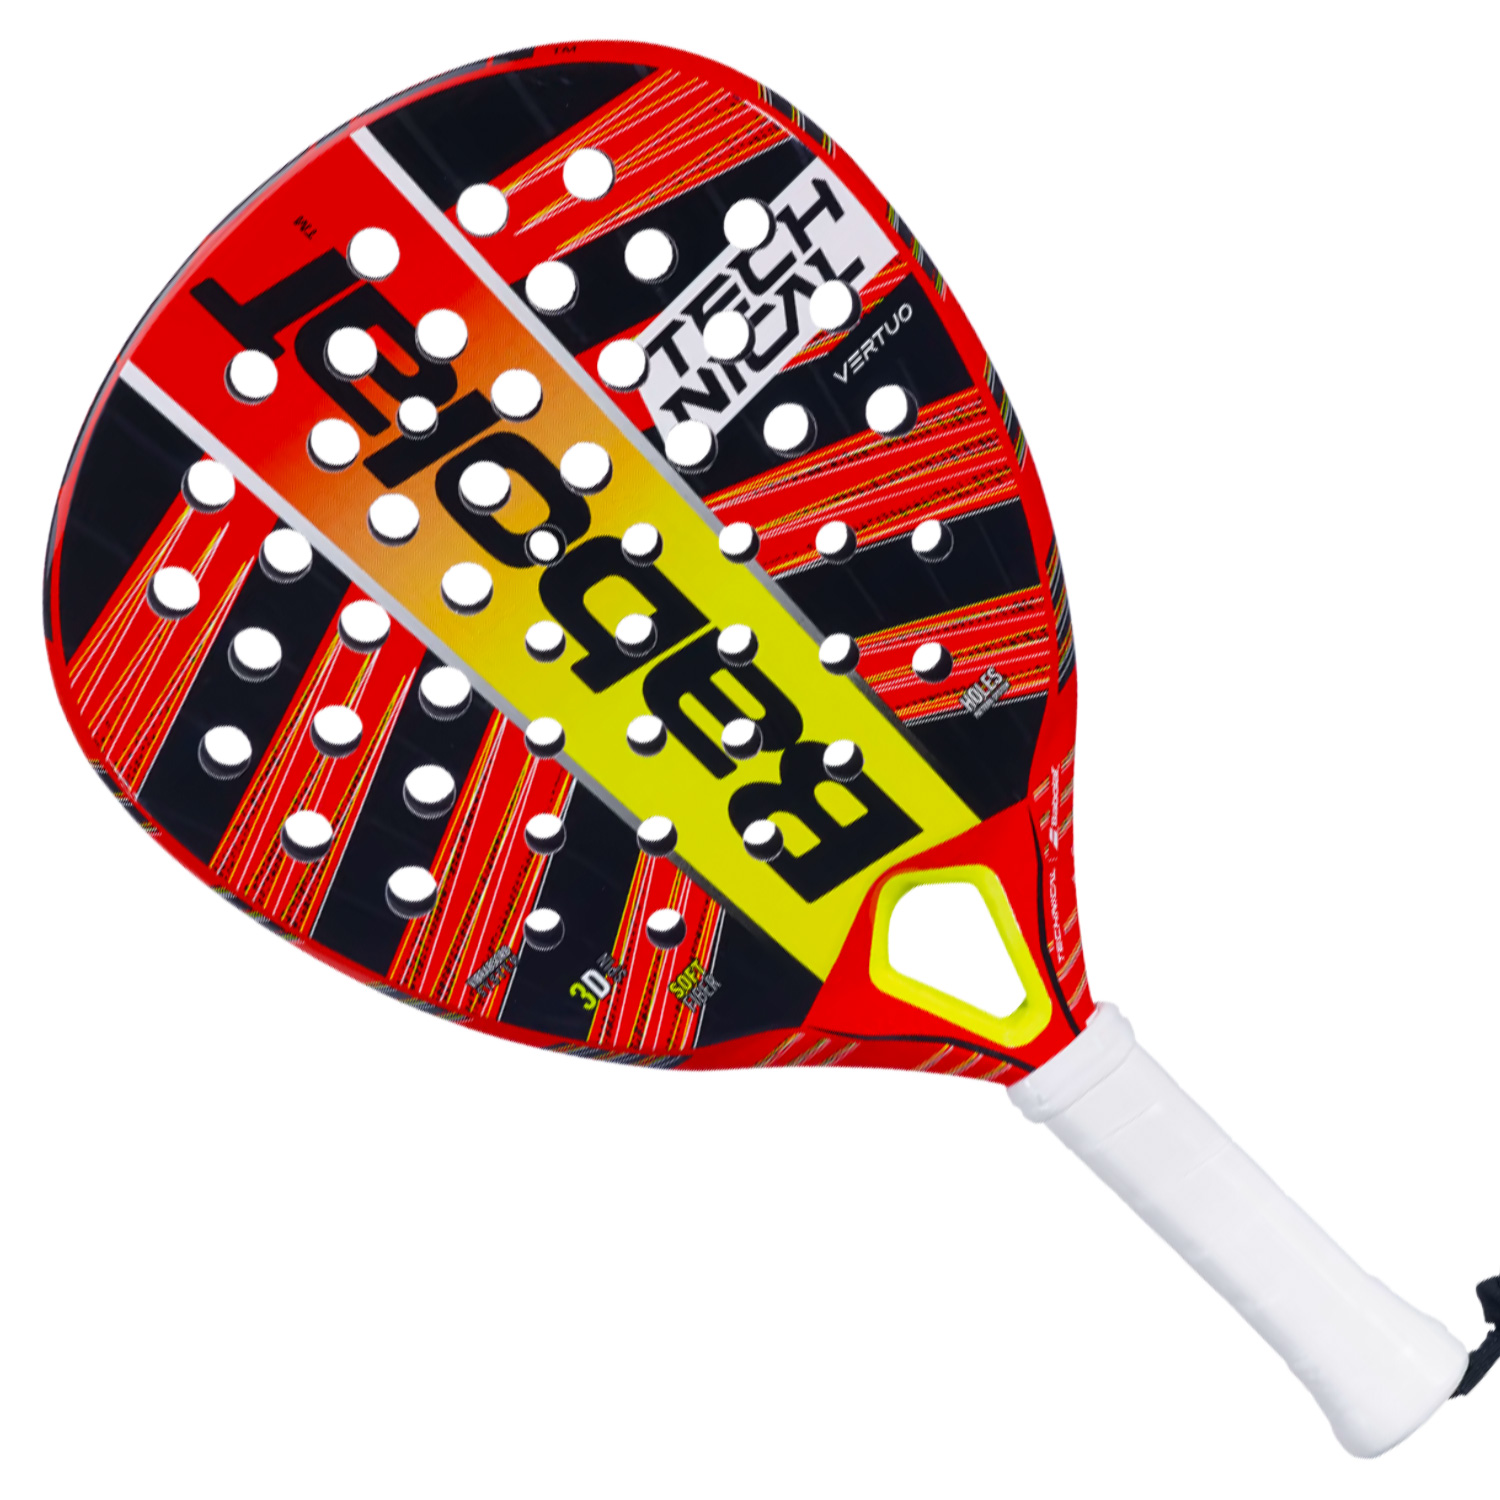 Buy Babolat Contact Padel Racket Online at PDH Padel (Fast Delivery)